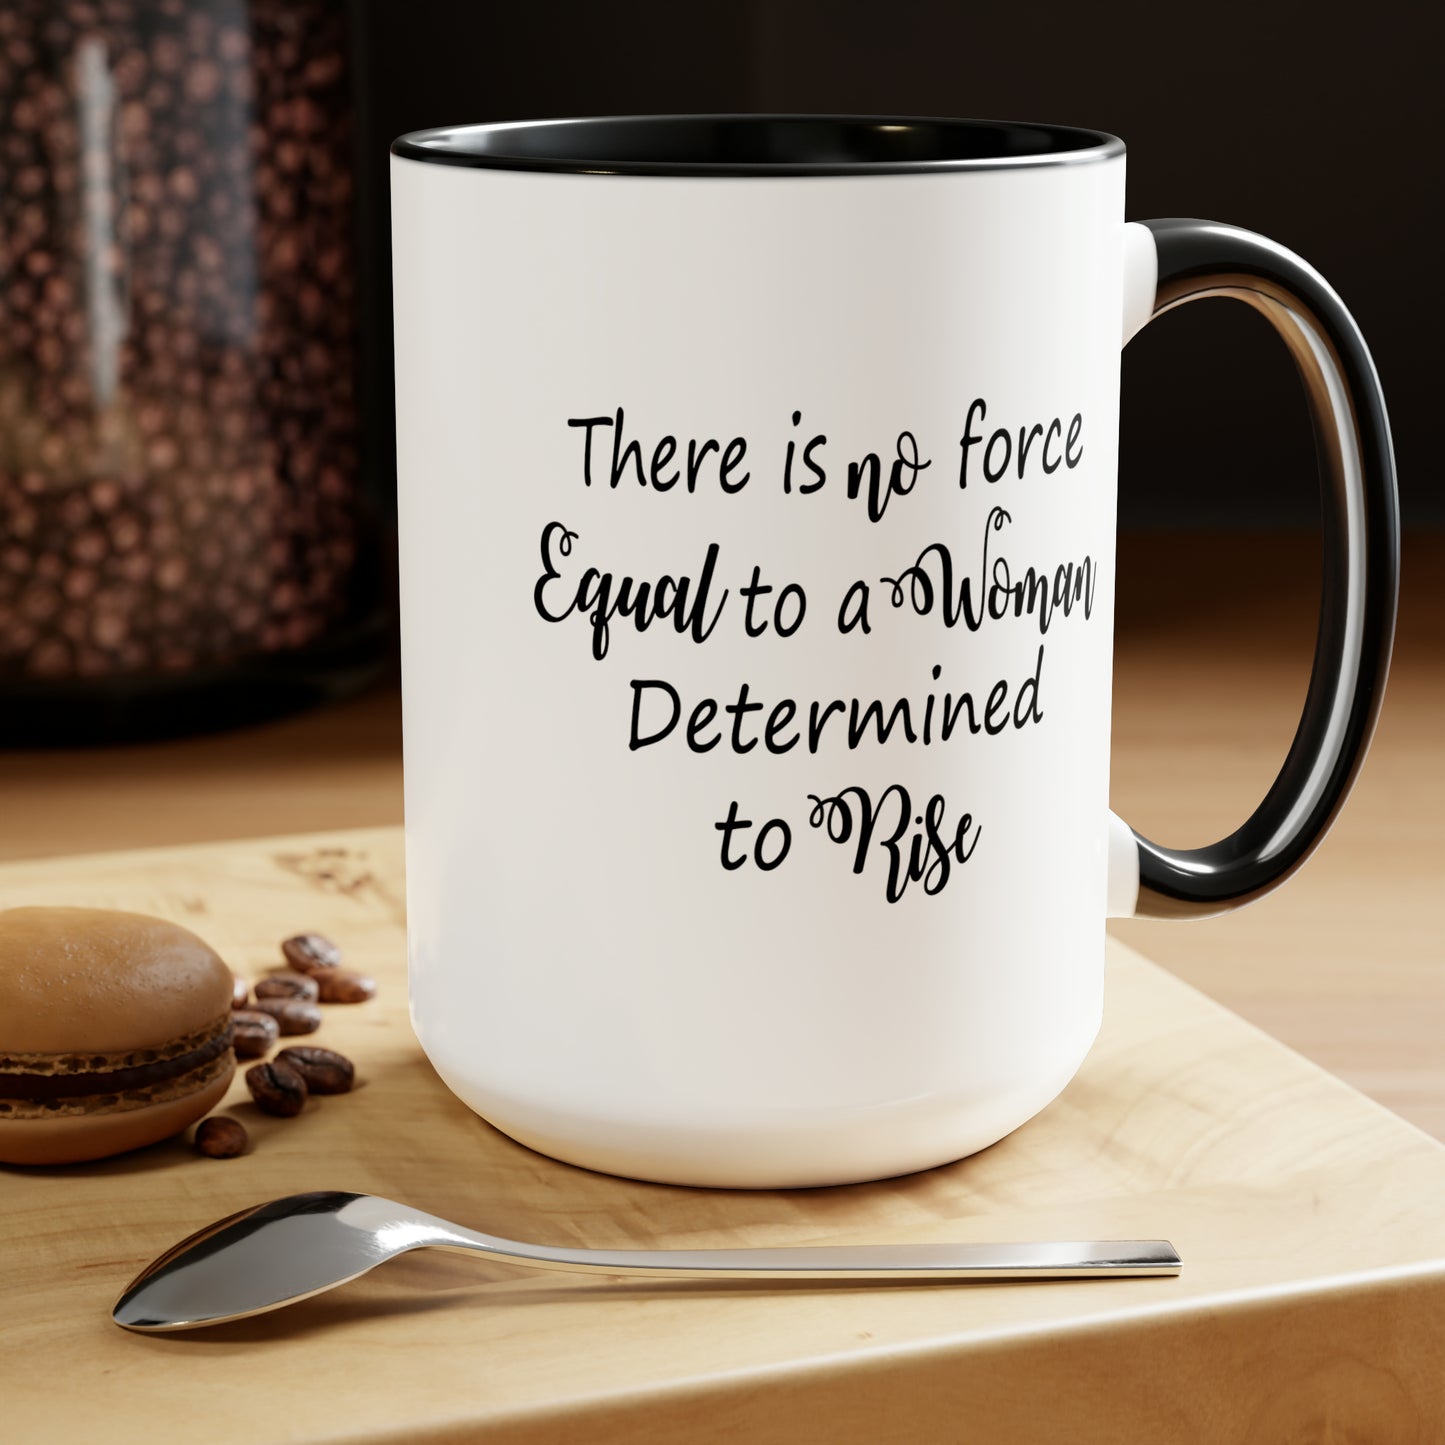 Determined Woman Coffee Mug - Double Sided Black Accent White Ceramic 15oz by TheGlassyLass.com